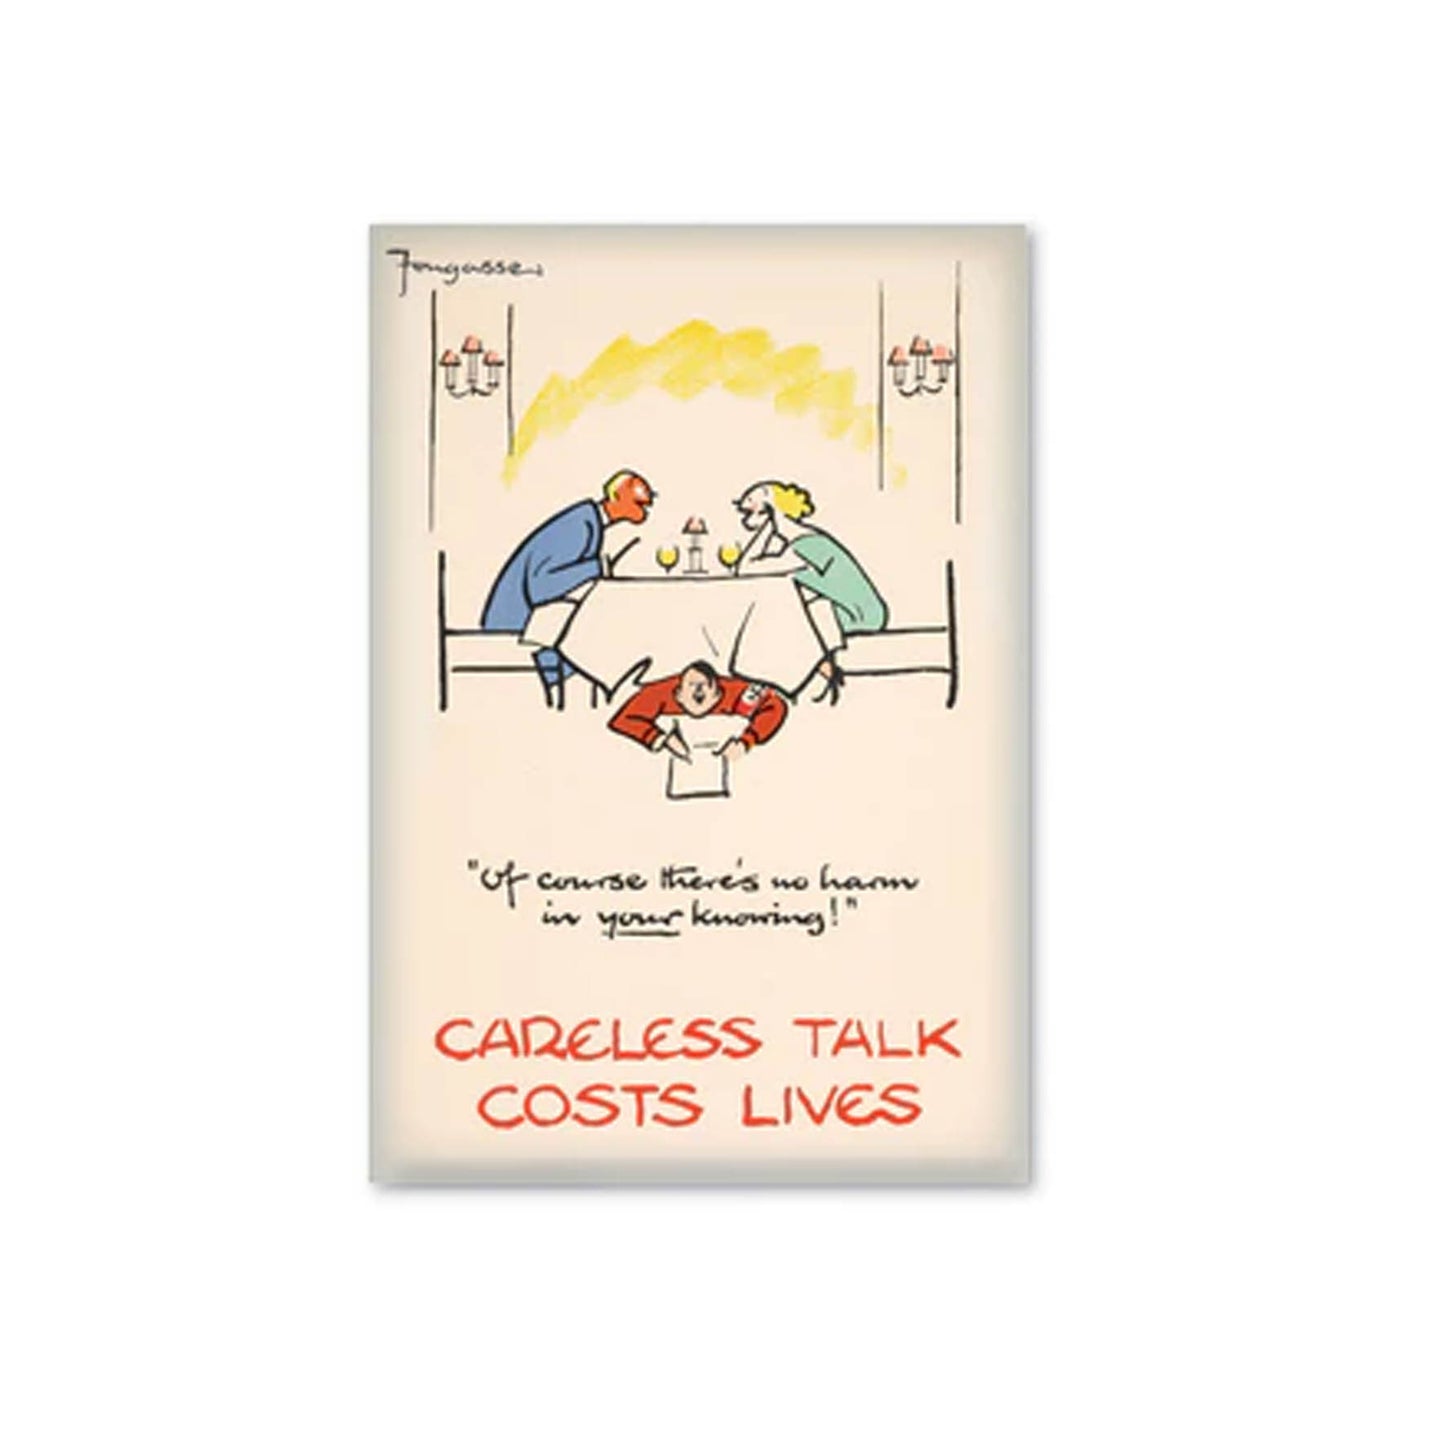 Magnet - 441022 Careless Talk Costs Lives Of course there's no harm in your knowing!